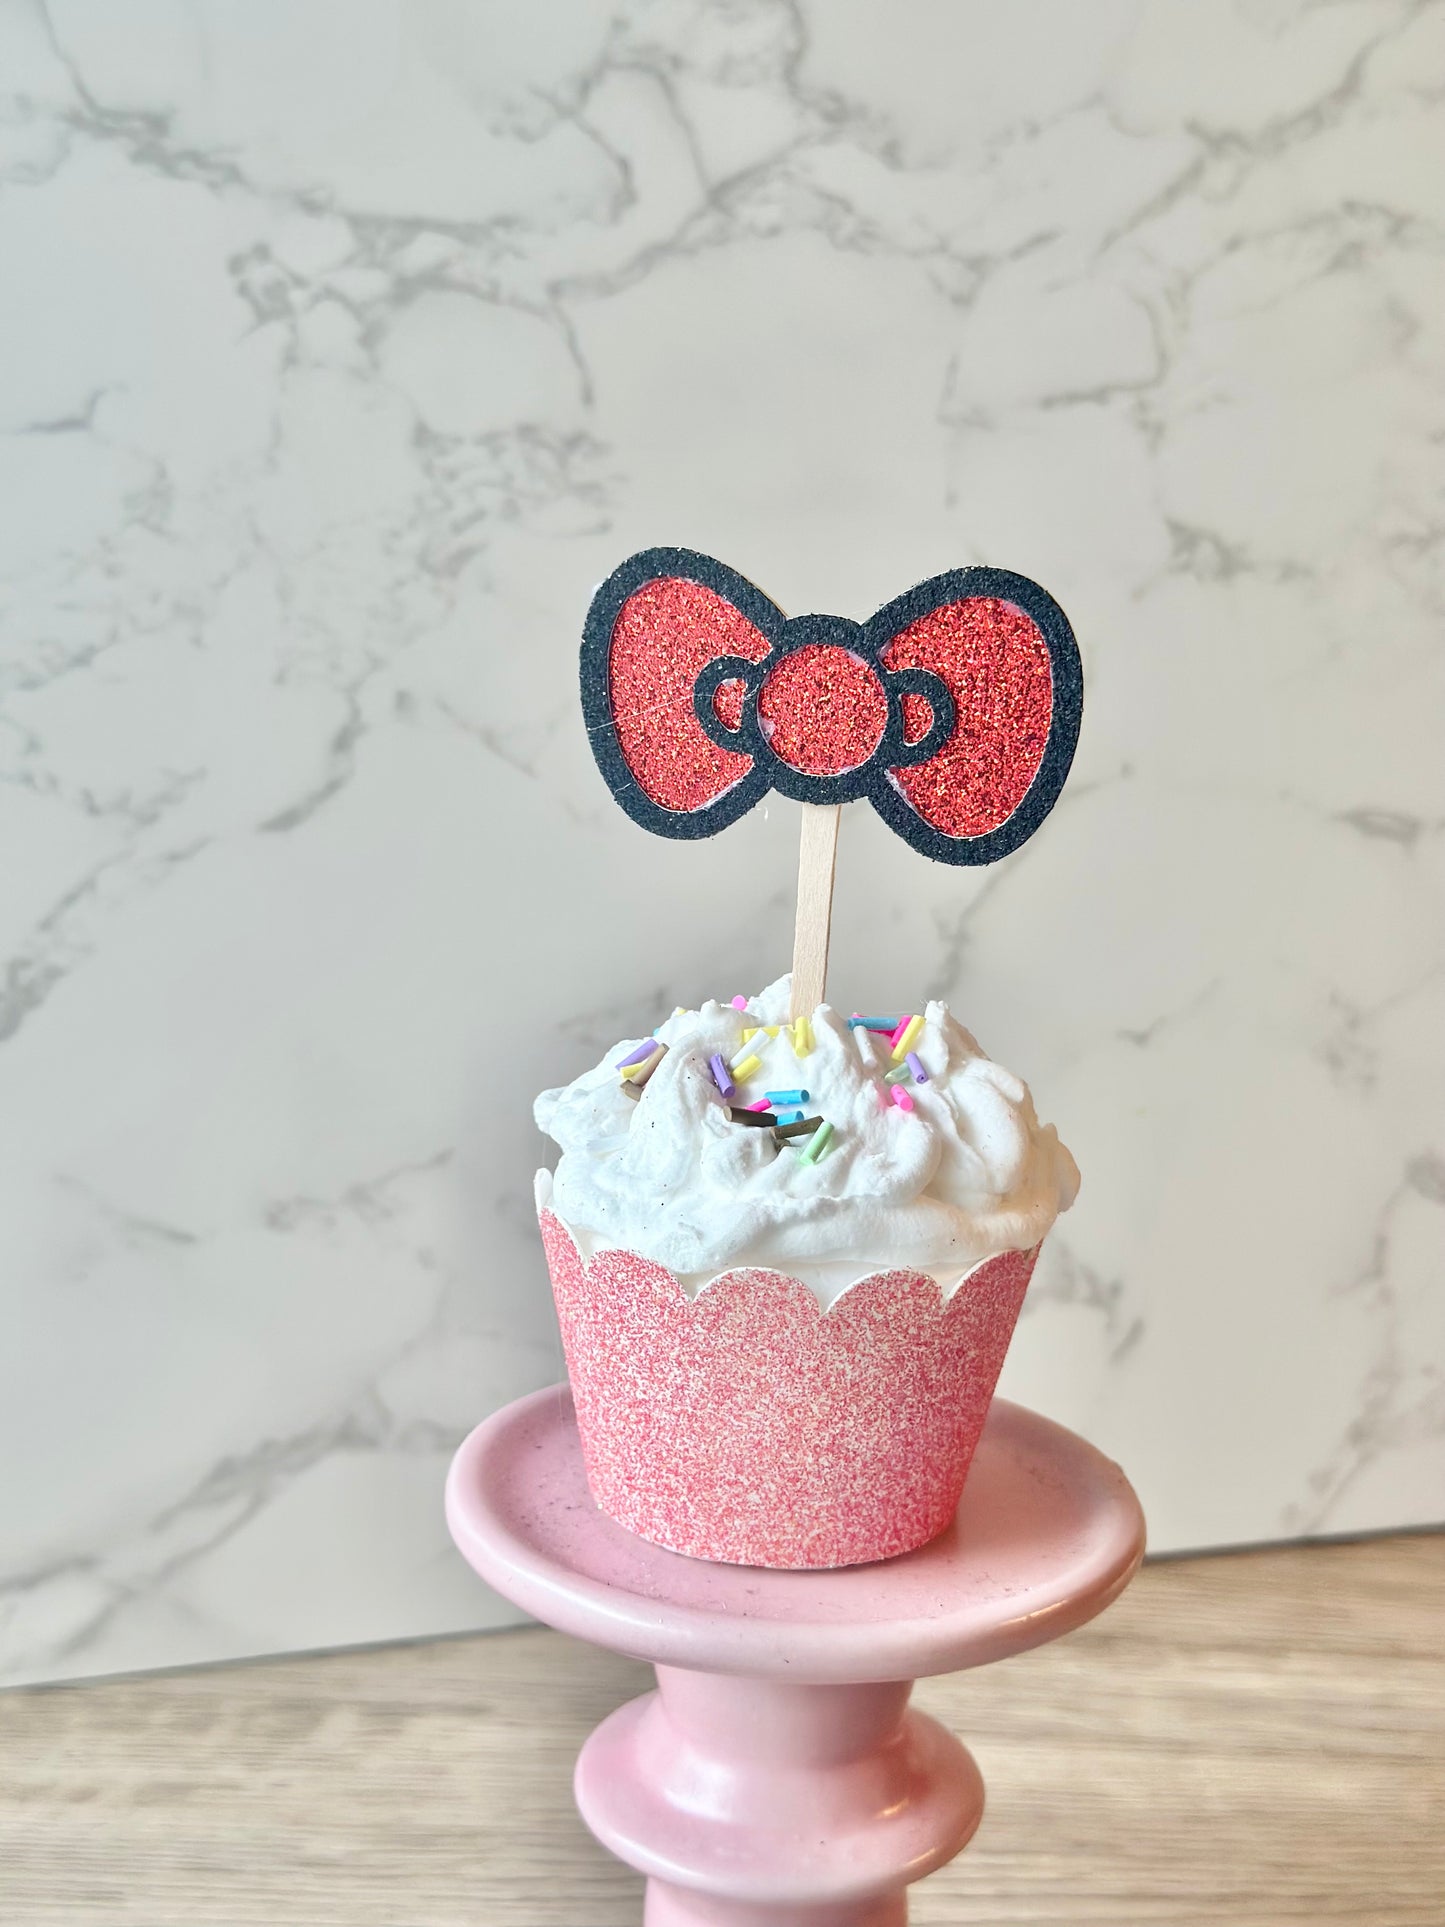 Kitty Bow Cupcake Toppers - Set of 12